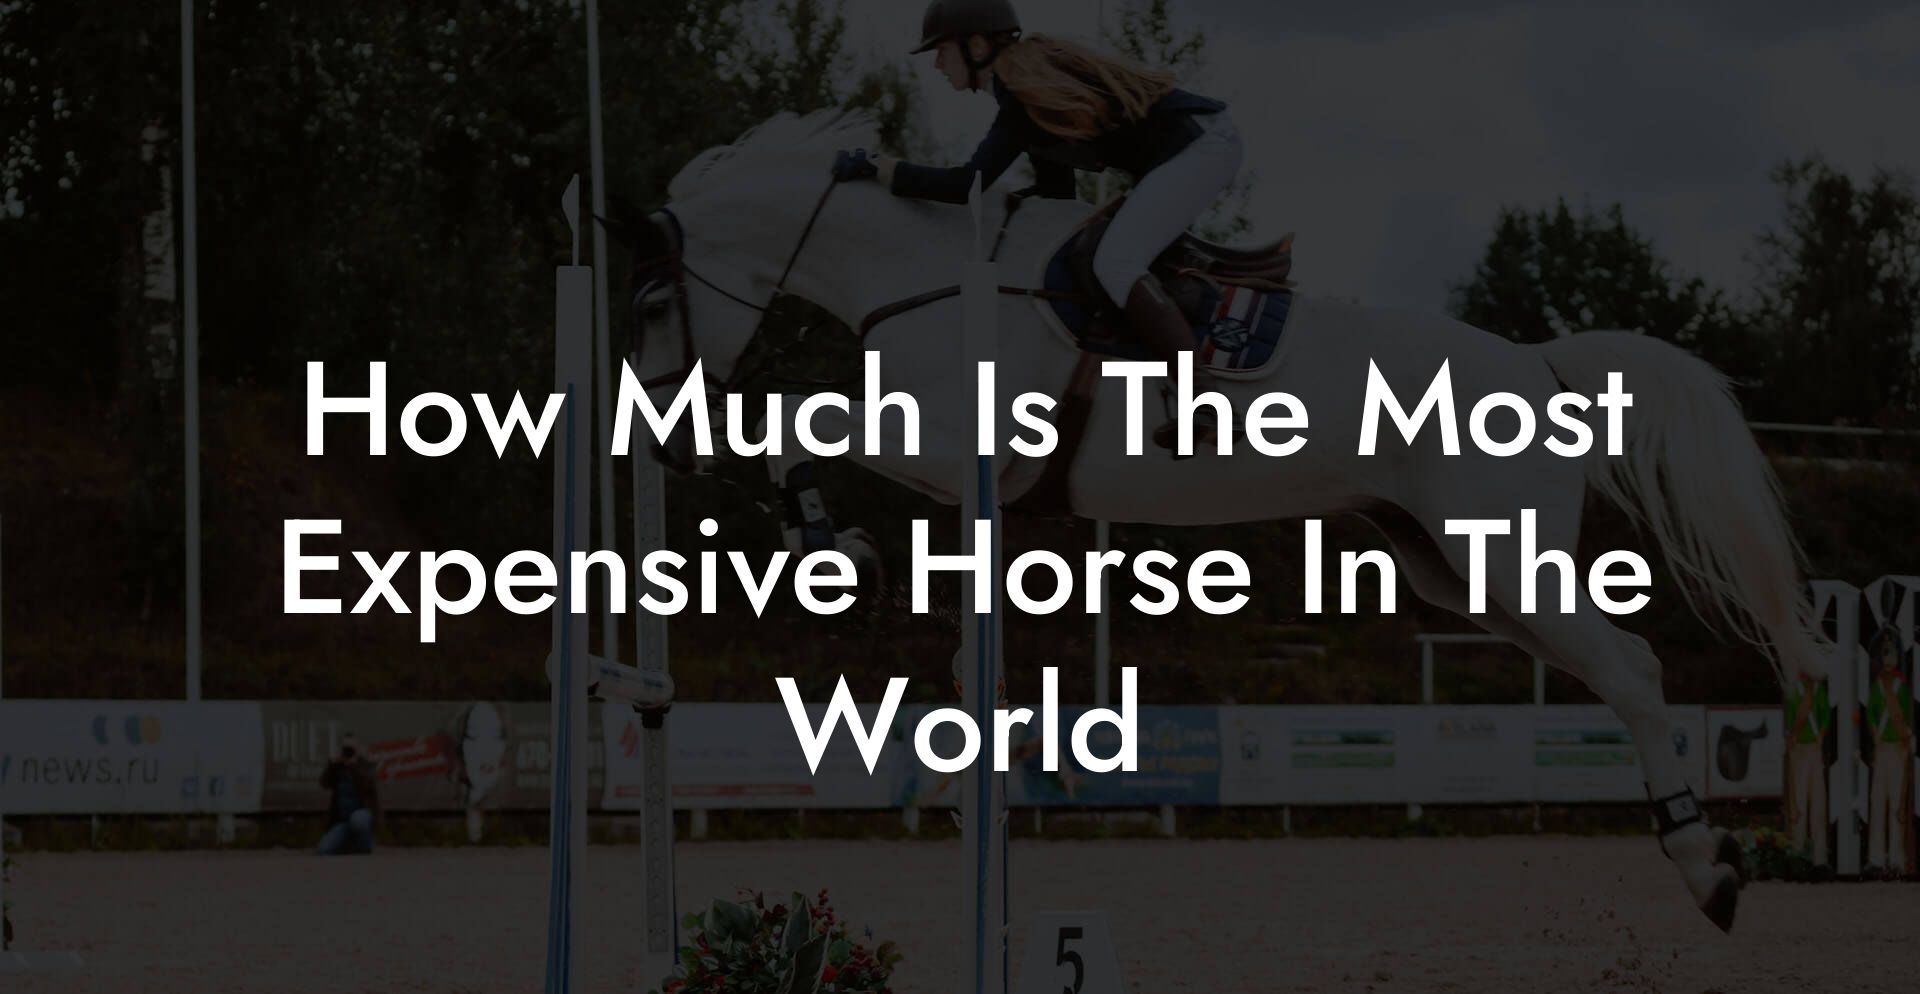 How Much Is The Most Expensive Horse In The World